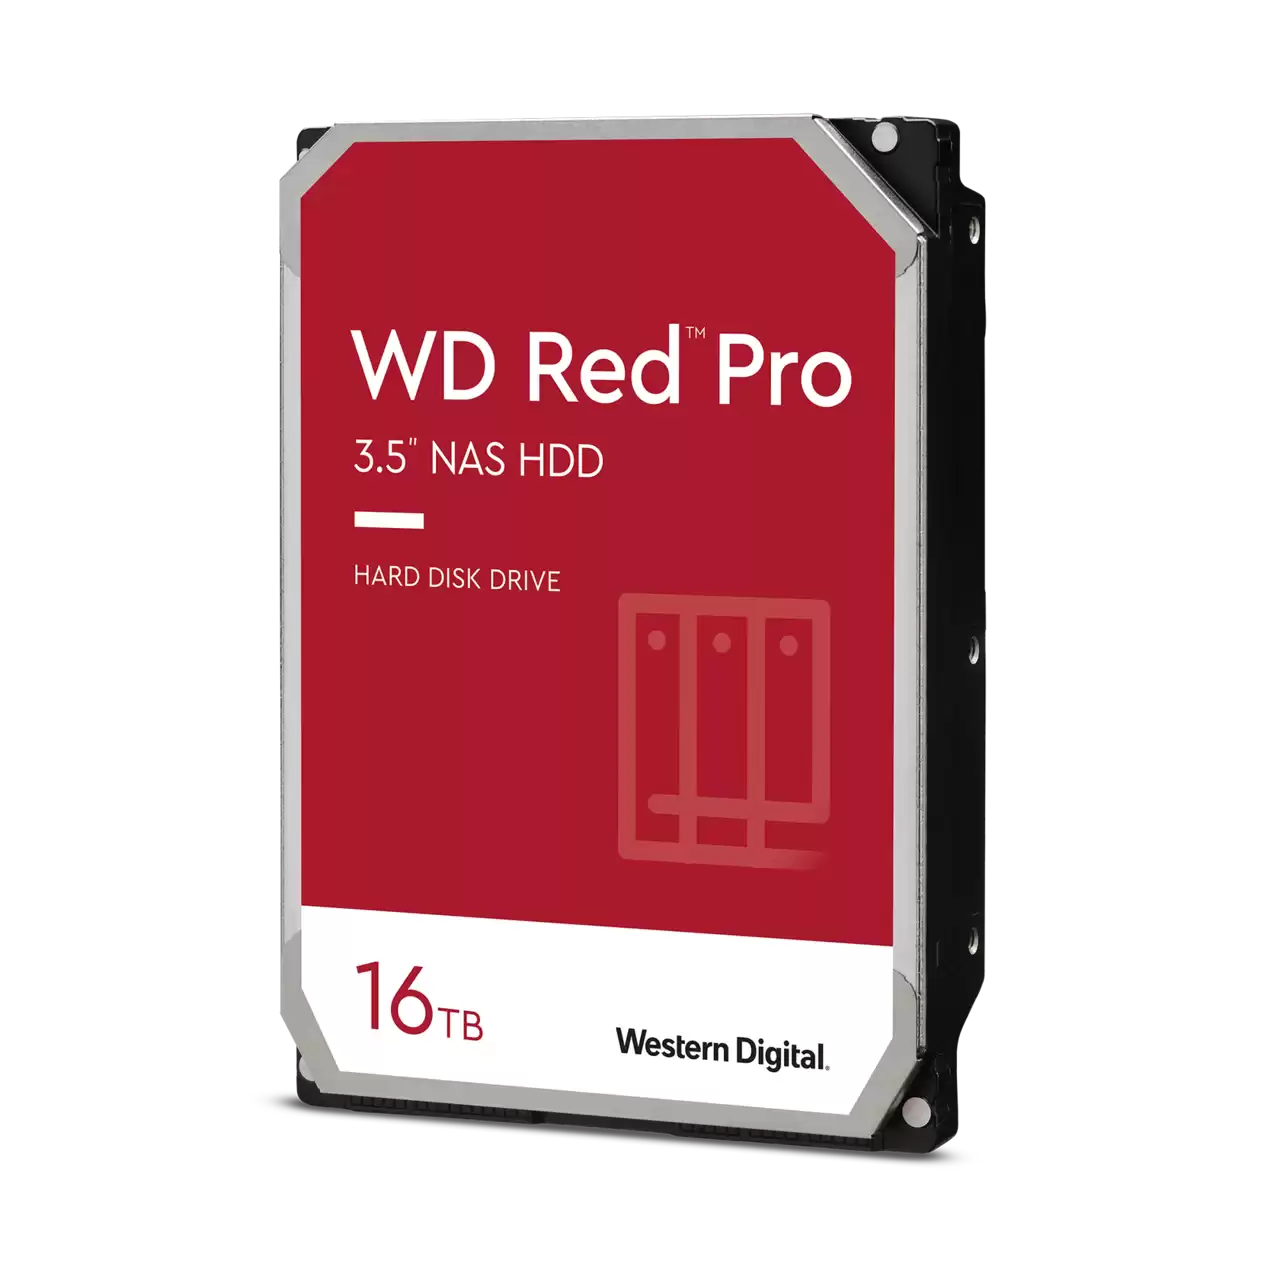 Buy 2 16TB for $499.98WD Red Pro 16TB NAS Hard Drive